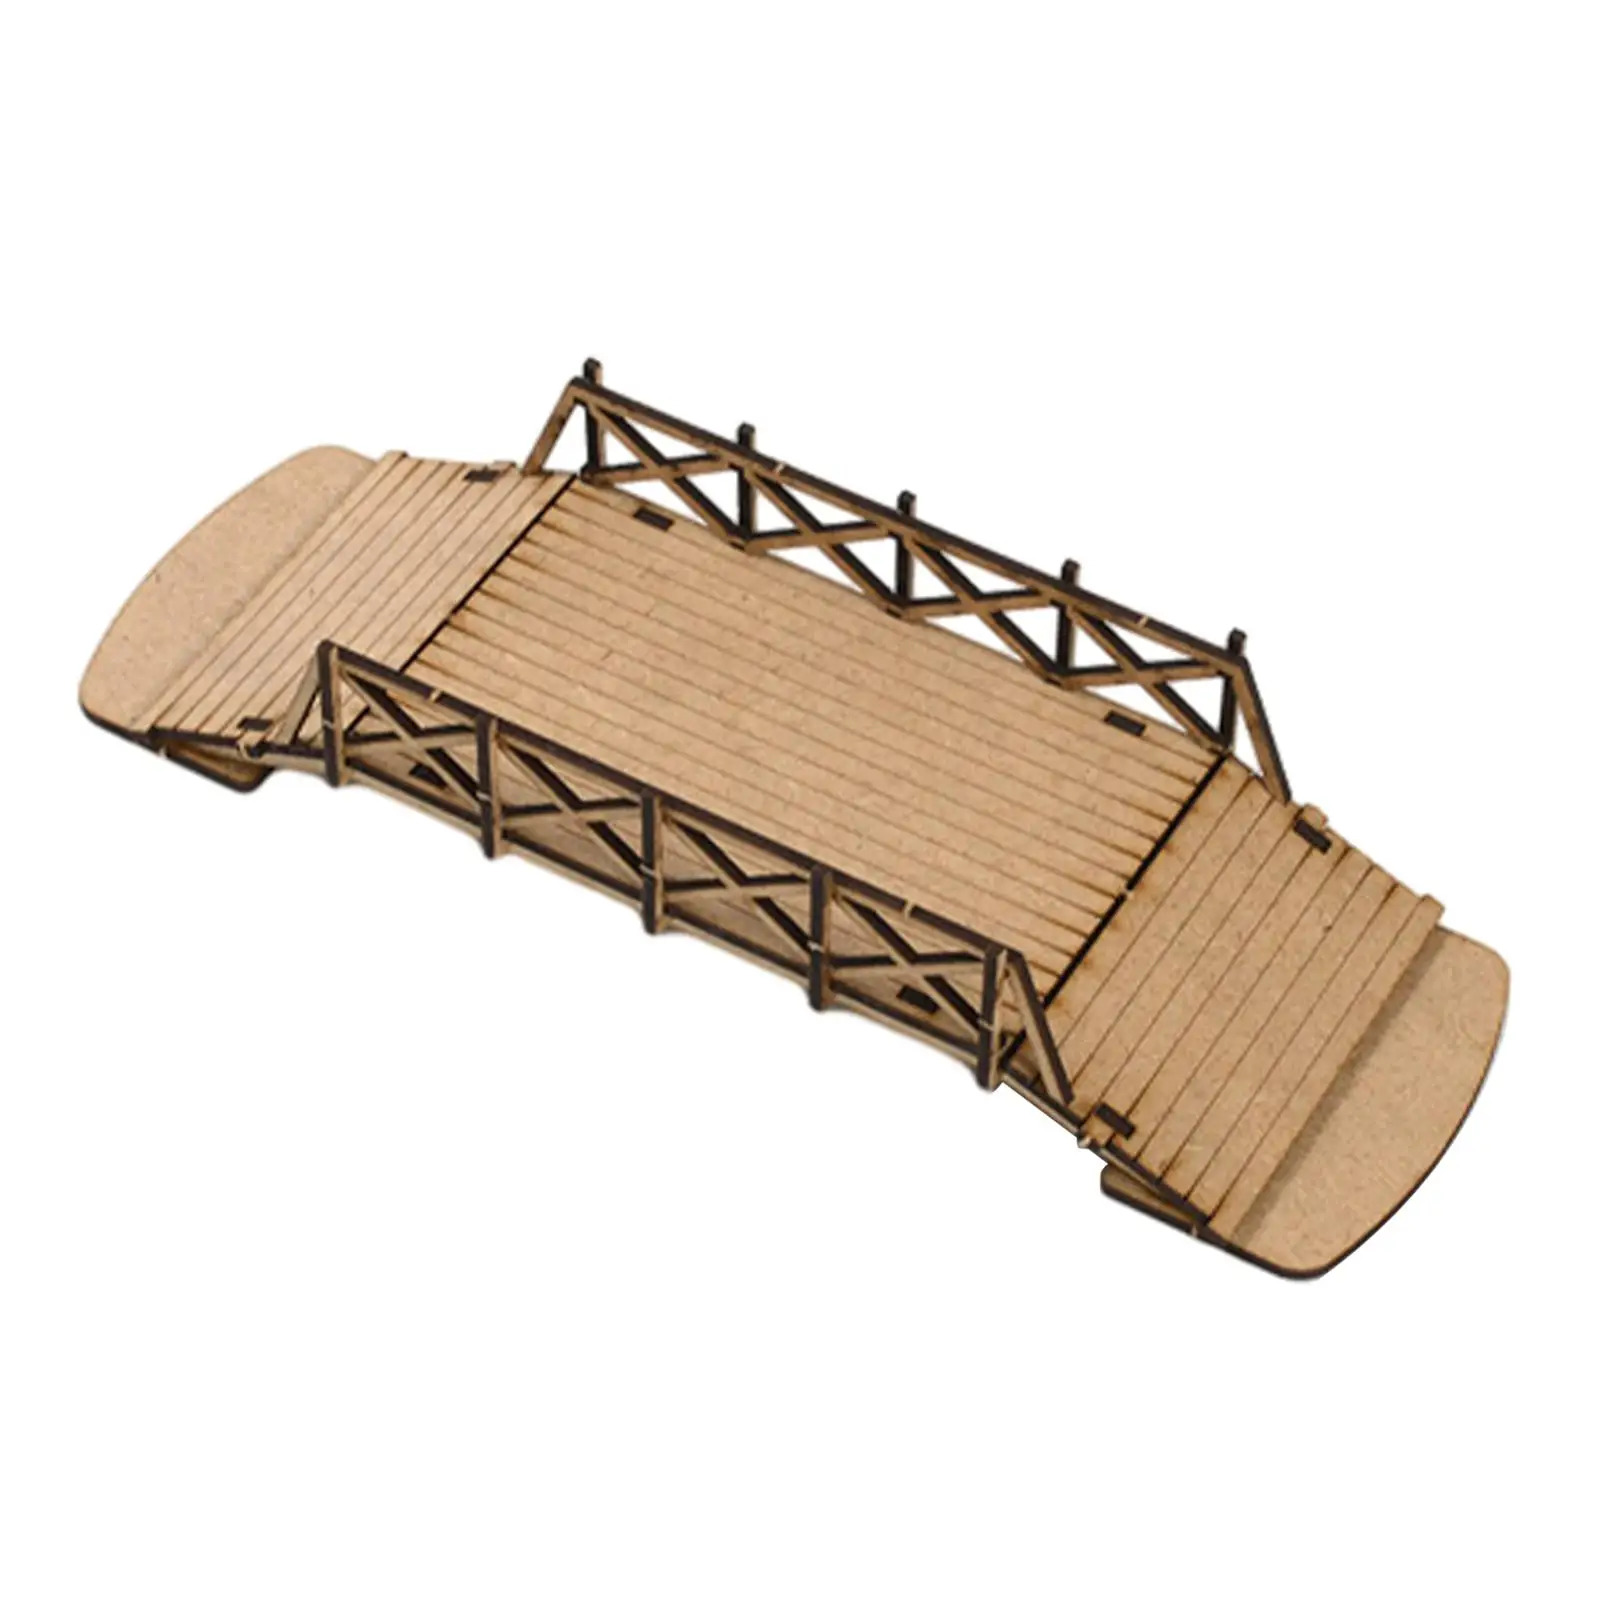 1/72 European Wooden Bridge Model Kits 3D Puzzle Unfinished Collection Handmade Wood Construction DIY Wooden Toy for Diorama